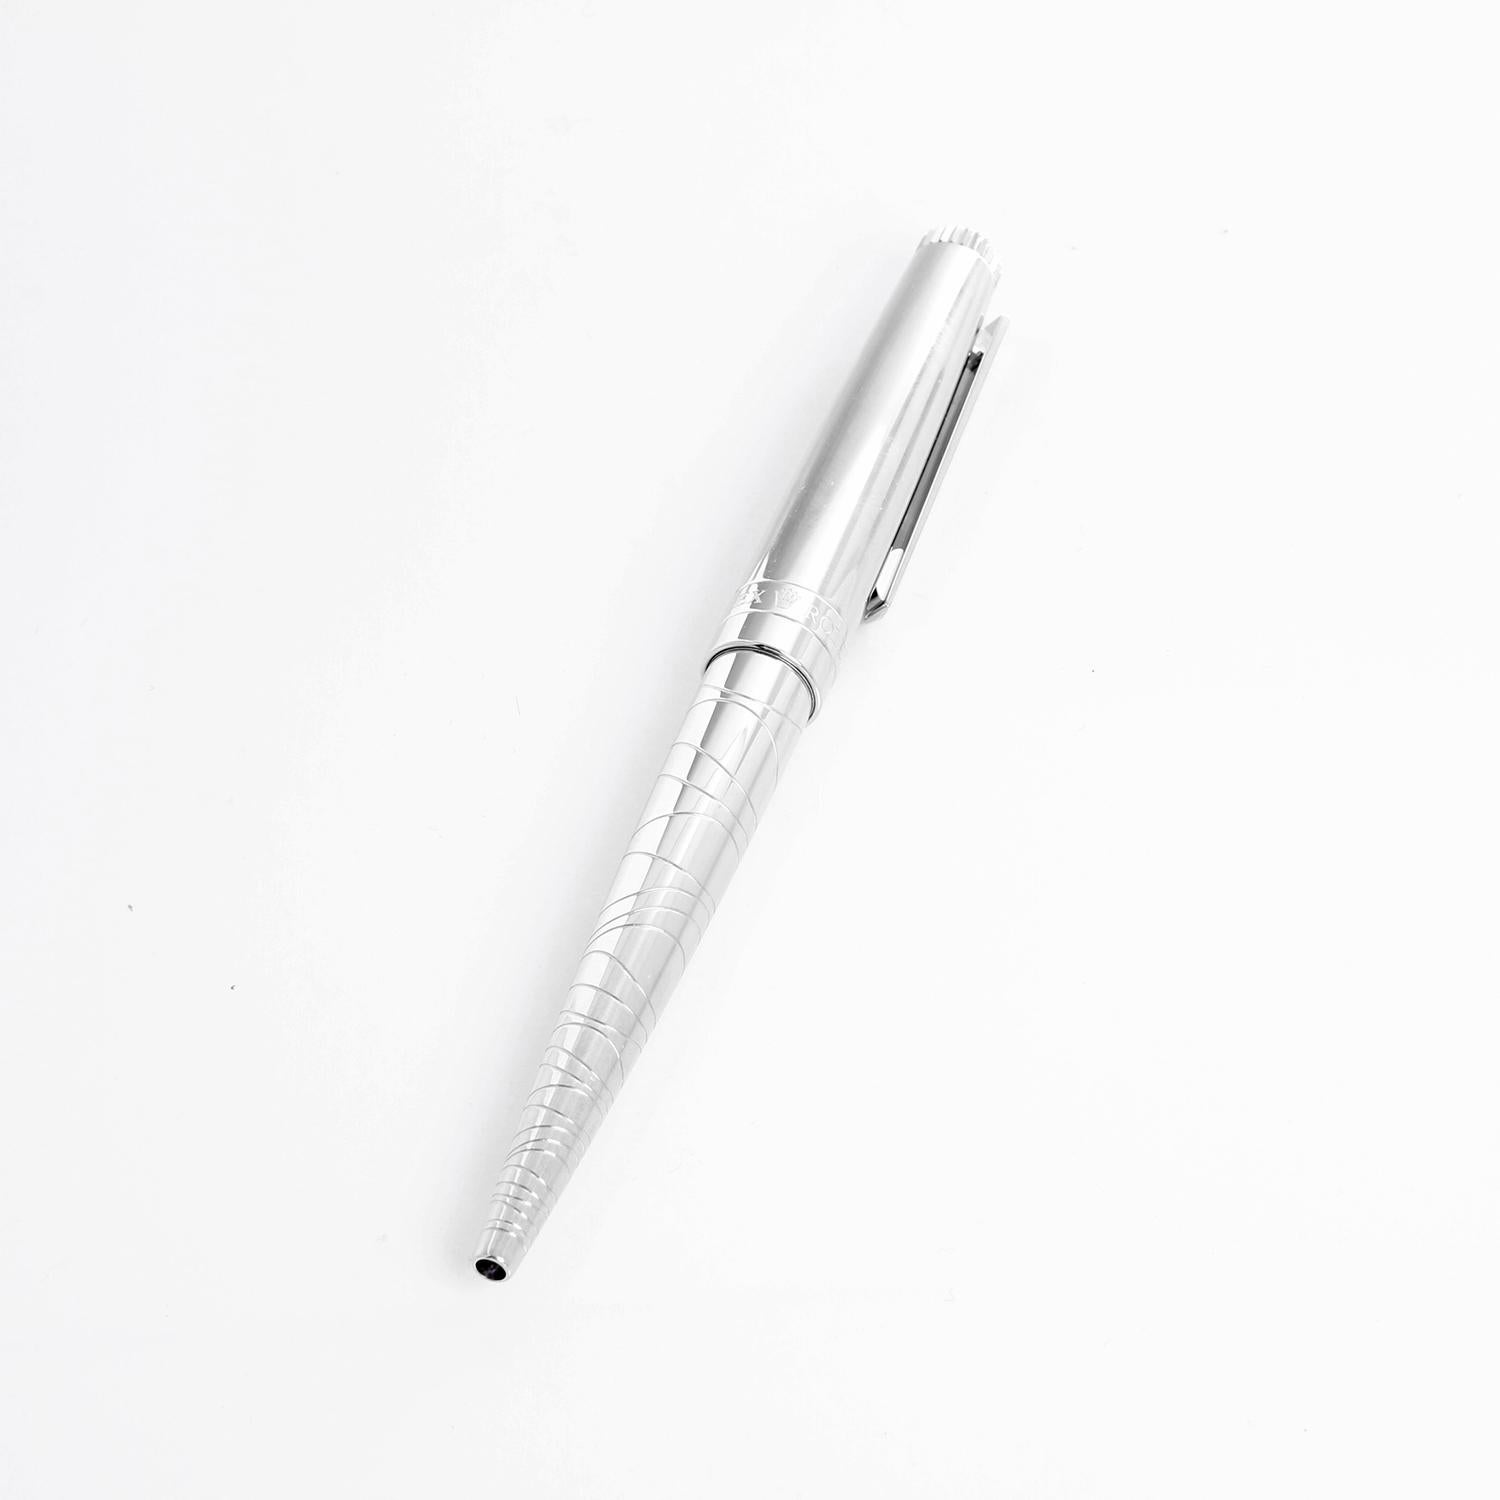 Rolex Ballpoint Push Pen - Silver Rolex pen with blue ink. Pre-owned with Rolex box. Measures 5.5 inches. Beautiful novelty gift.